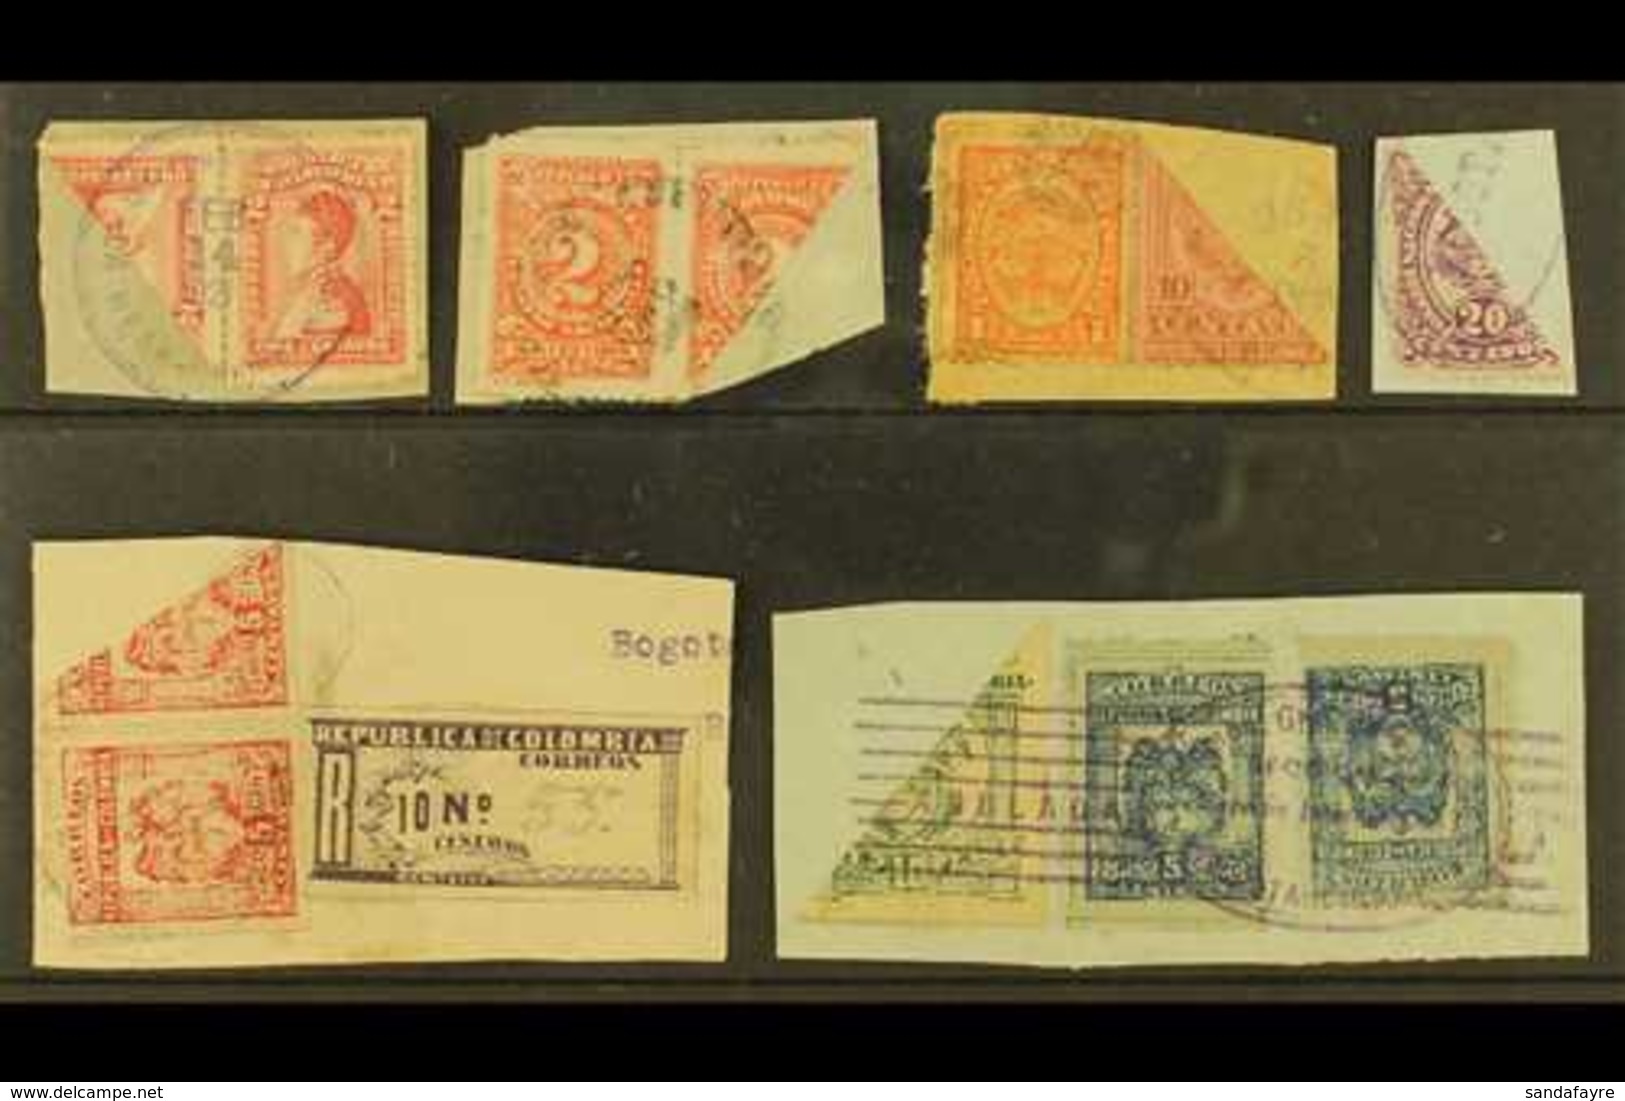 1899-1921 BISECTS. An Interesting Group Of All Different Diagonally BISECTED Stamps With Values To 10p, Used On Pieces M - Colombia